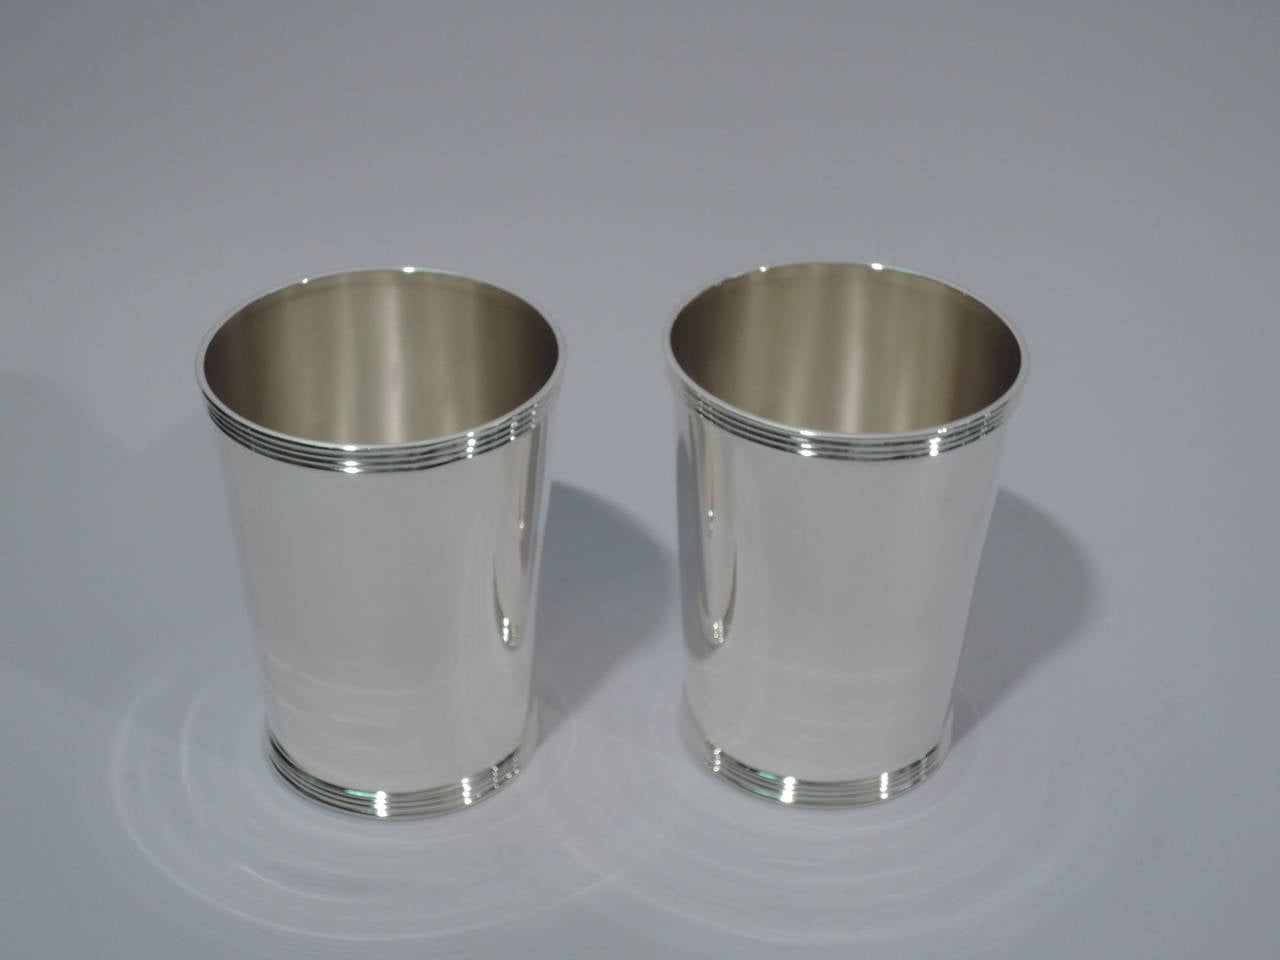 Pair of sterling silver mint julep cups. Made by Whiting in New York. Each: straight sides and reeded rim and foot. Hallmark includes no. 5 and phrase Old Kentucky Mint Julep Cup. Excellent condition. 

Dimensions: H 3 7/8 x D 3 in. Total weight: